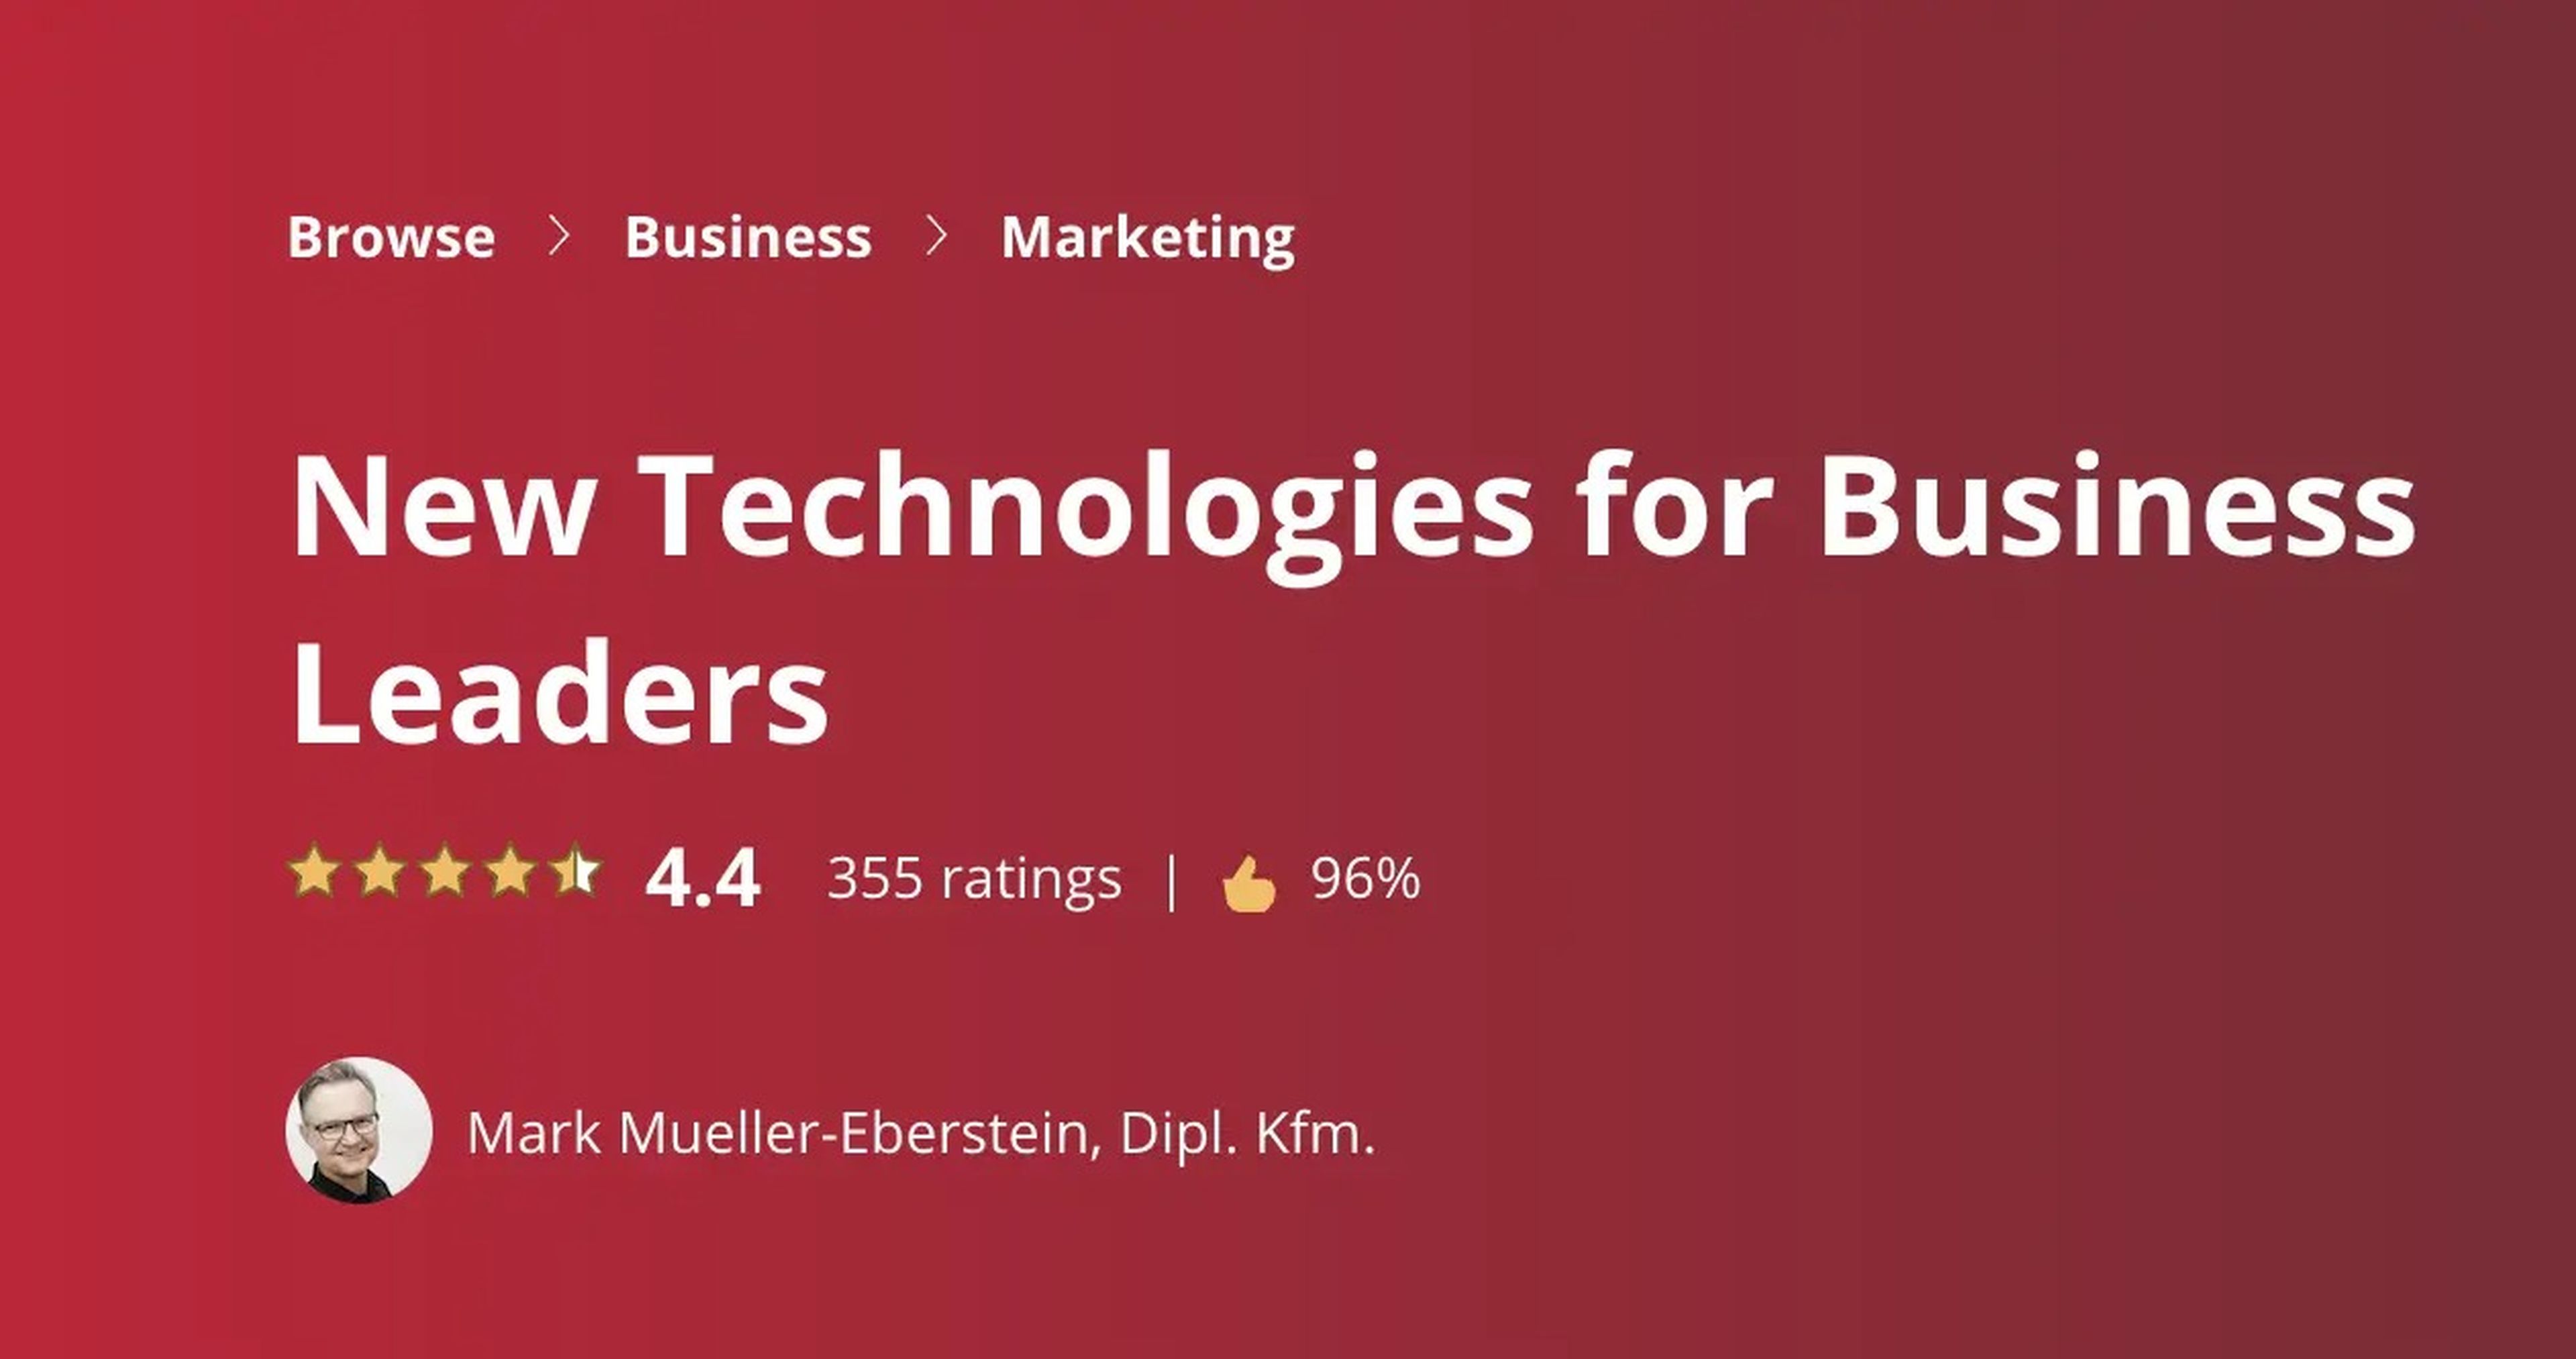 New Technologies for Business Leaders Coursera course